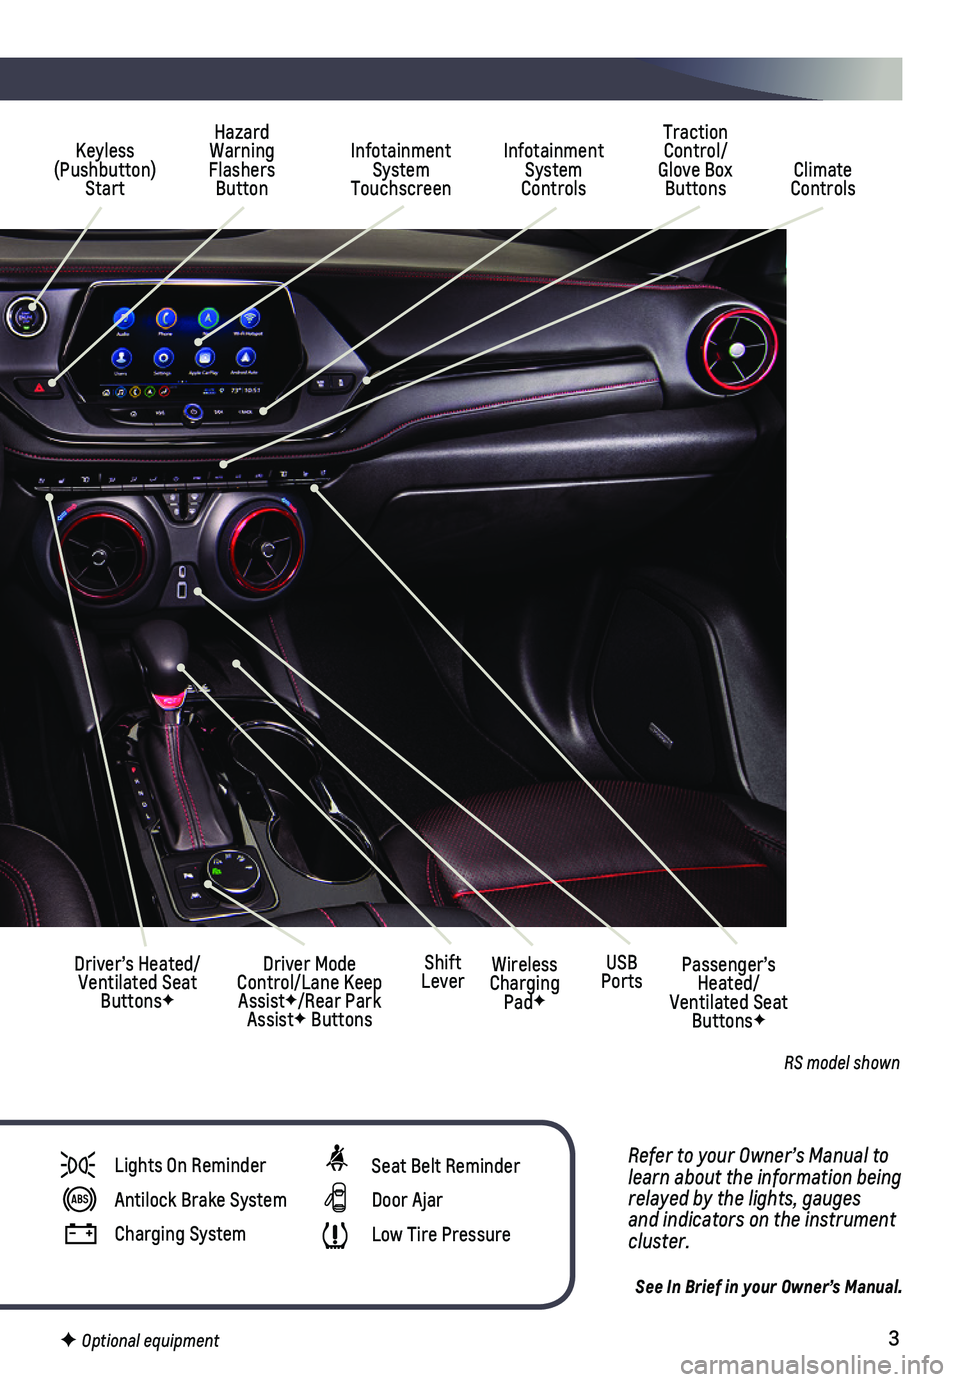 CHEVROLET BLAZER 2019  Get To Know Guide 3
Refer to your Owner’s Manual to learn about the information being relayed by the lights, gauges and indicators on the instrument cluster.
See In Brief in your Owner’s Manual.
Infotainment System